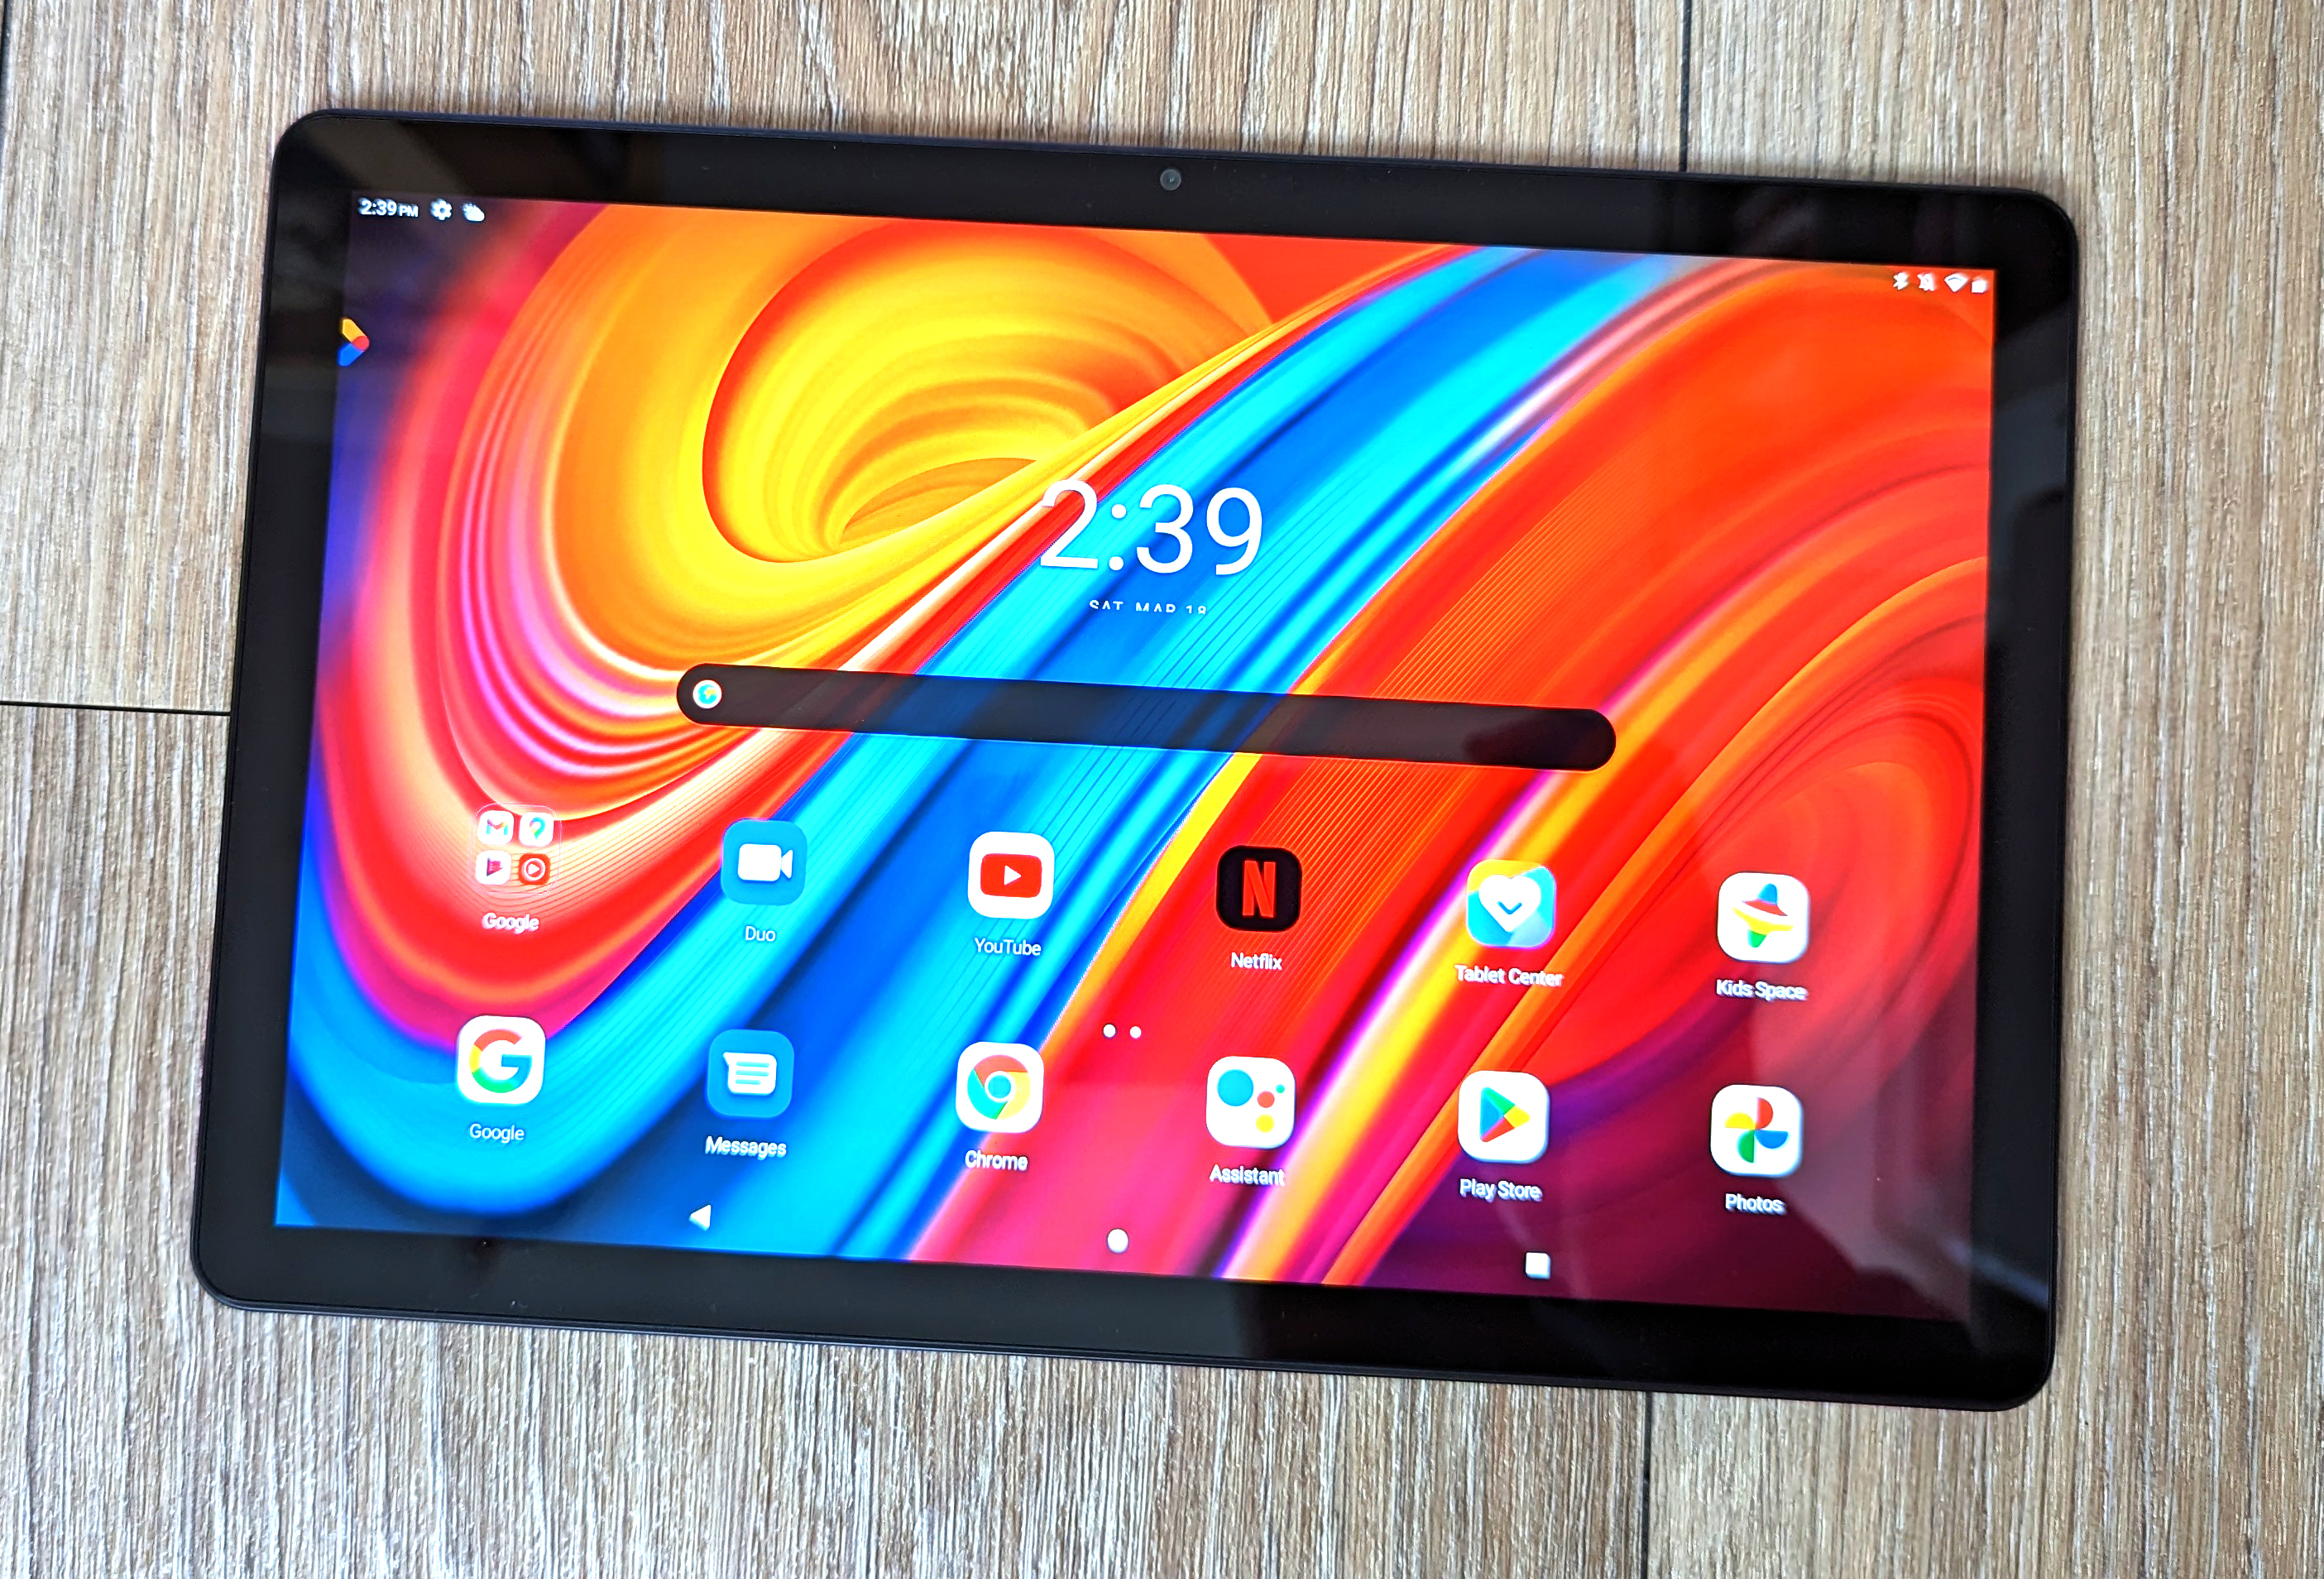 Lenovo Tab M10 5G brings a bunch of upgrades and one of them is in its name